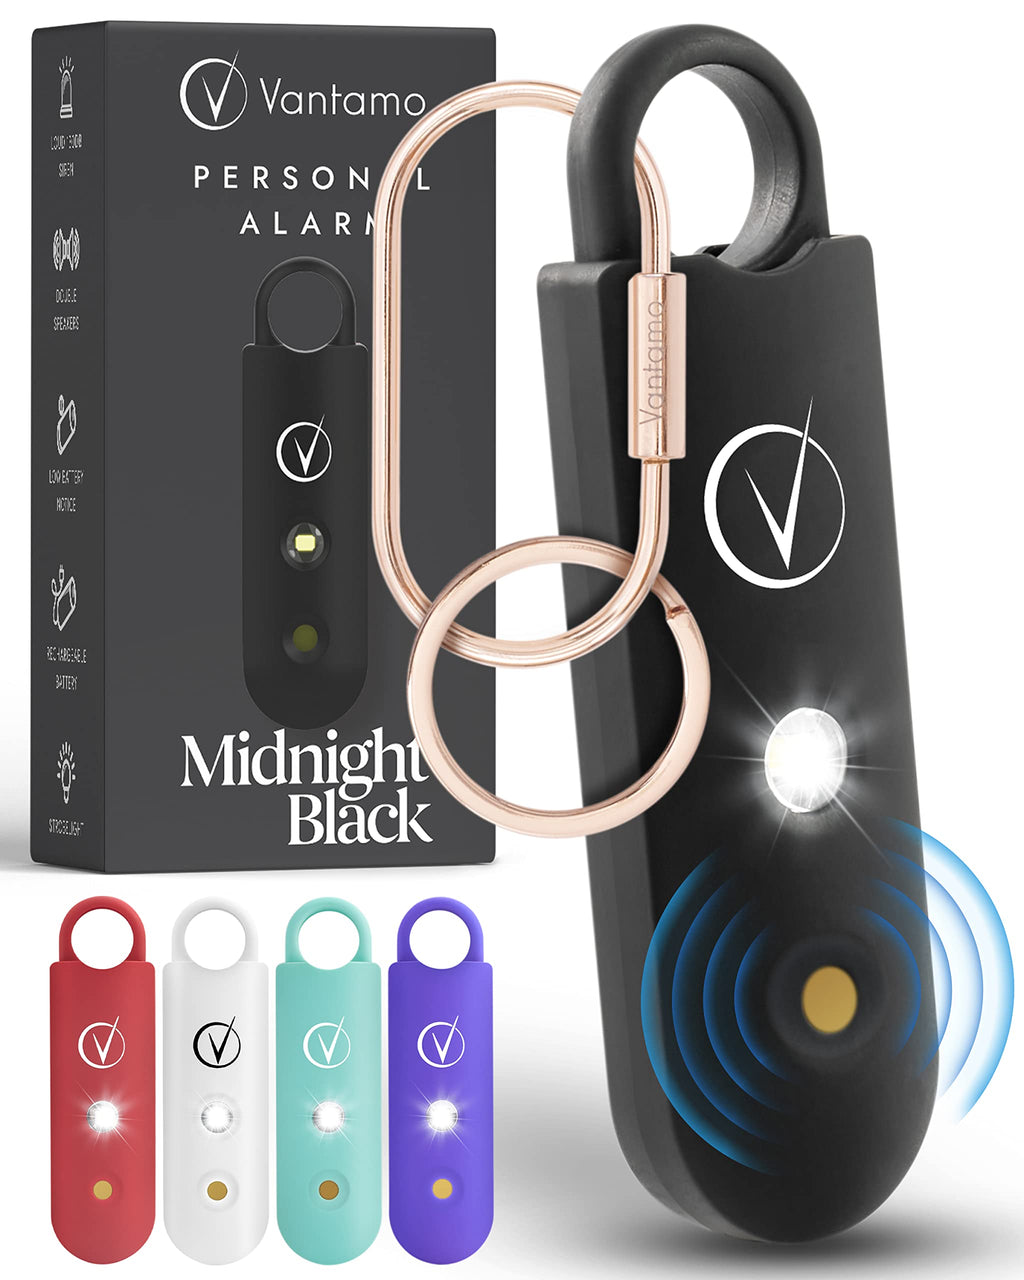  [AUSTRALIA] - Vantamo Personal Alarm for Women - Extra Loud Double Speakers, First with Low Battery Notice with Strobe Light, Rechargeable - Safety Alarm Keychain - Midnight Black Midnight Black.